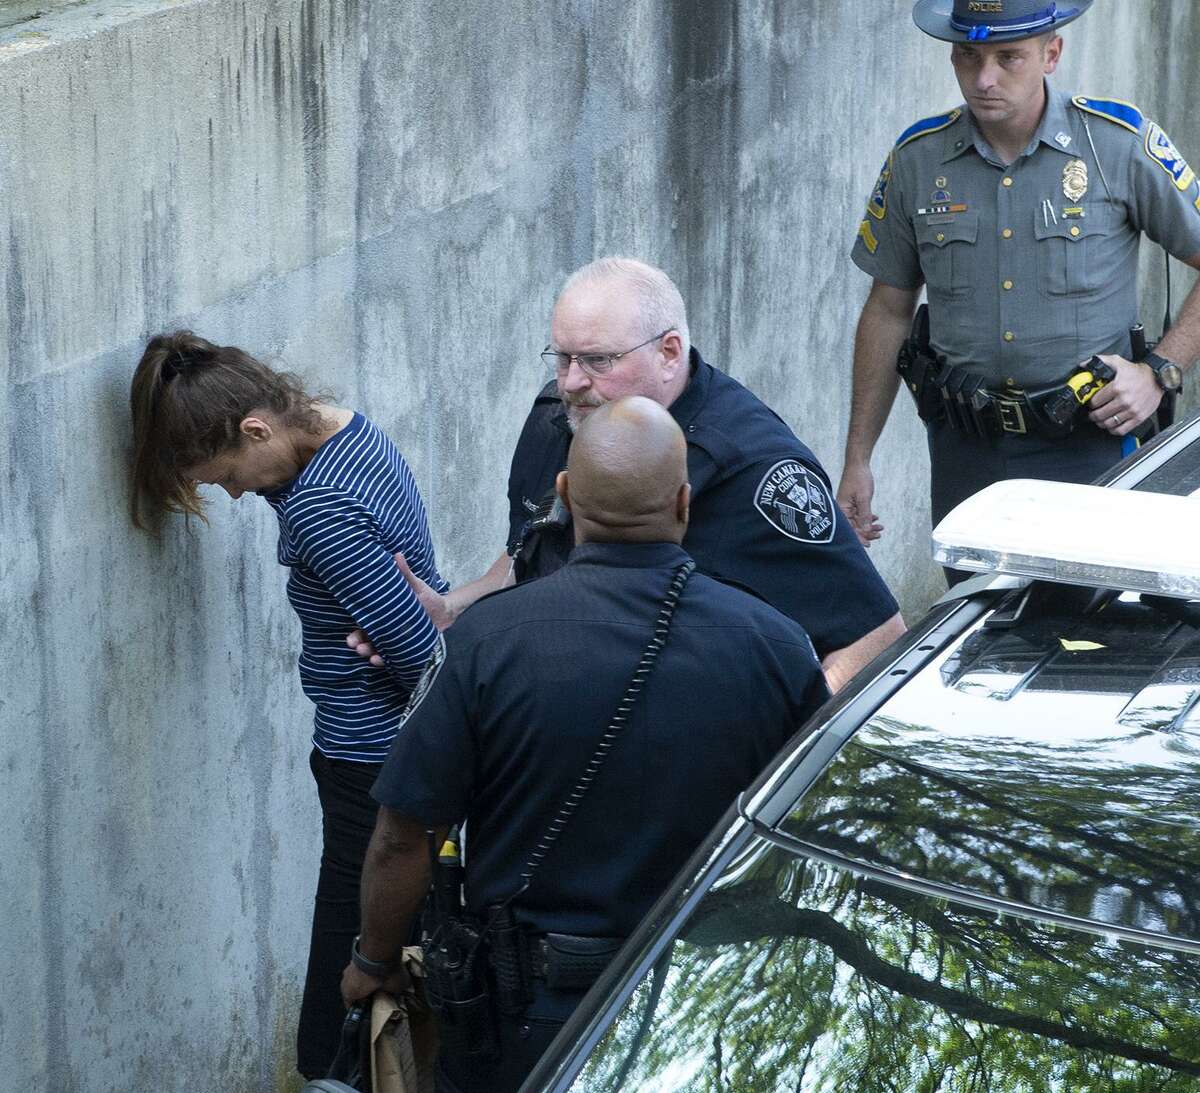 Michelle Troconis, 44, the girlfriend of Fotis Dulos, 51, is led into Norwalk Superior Court on Monday morning, June 3, 2019 by New Canaan police, judicial marshals and the state police. Troconis and Dulos were both arrested late Saturday night by state police detectives at a hotel in Avon and have been held on $500,000 bond pending arraignment in Norwalk Superior Court. Fotis Dulos, the estranged husband of missing New Canaan mother of five Jennifer Farber Dulos, has been charged in connection with the investigation into her disappearance. New Canaan police said Sunday they charged Fotis Dulos with hindering prosecution and tampering with evidence, along with Troconis (Patrick Raycraft/Hartford Courant/TNS)